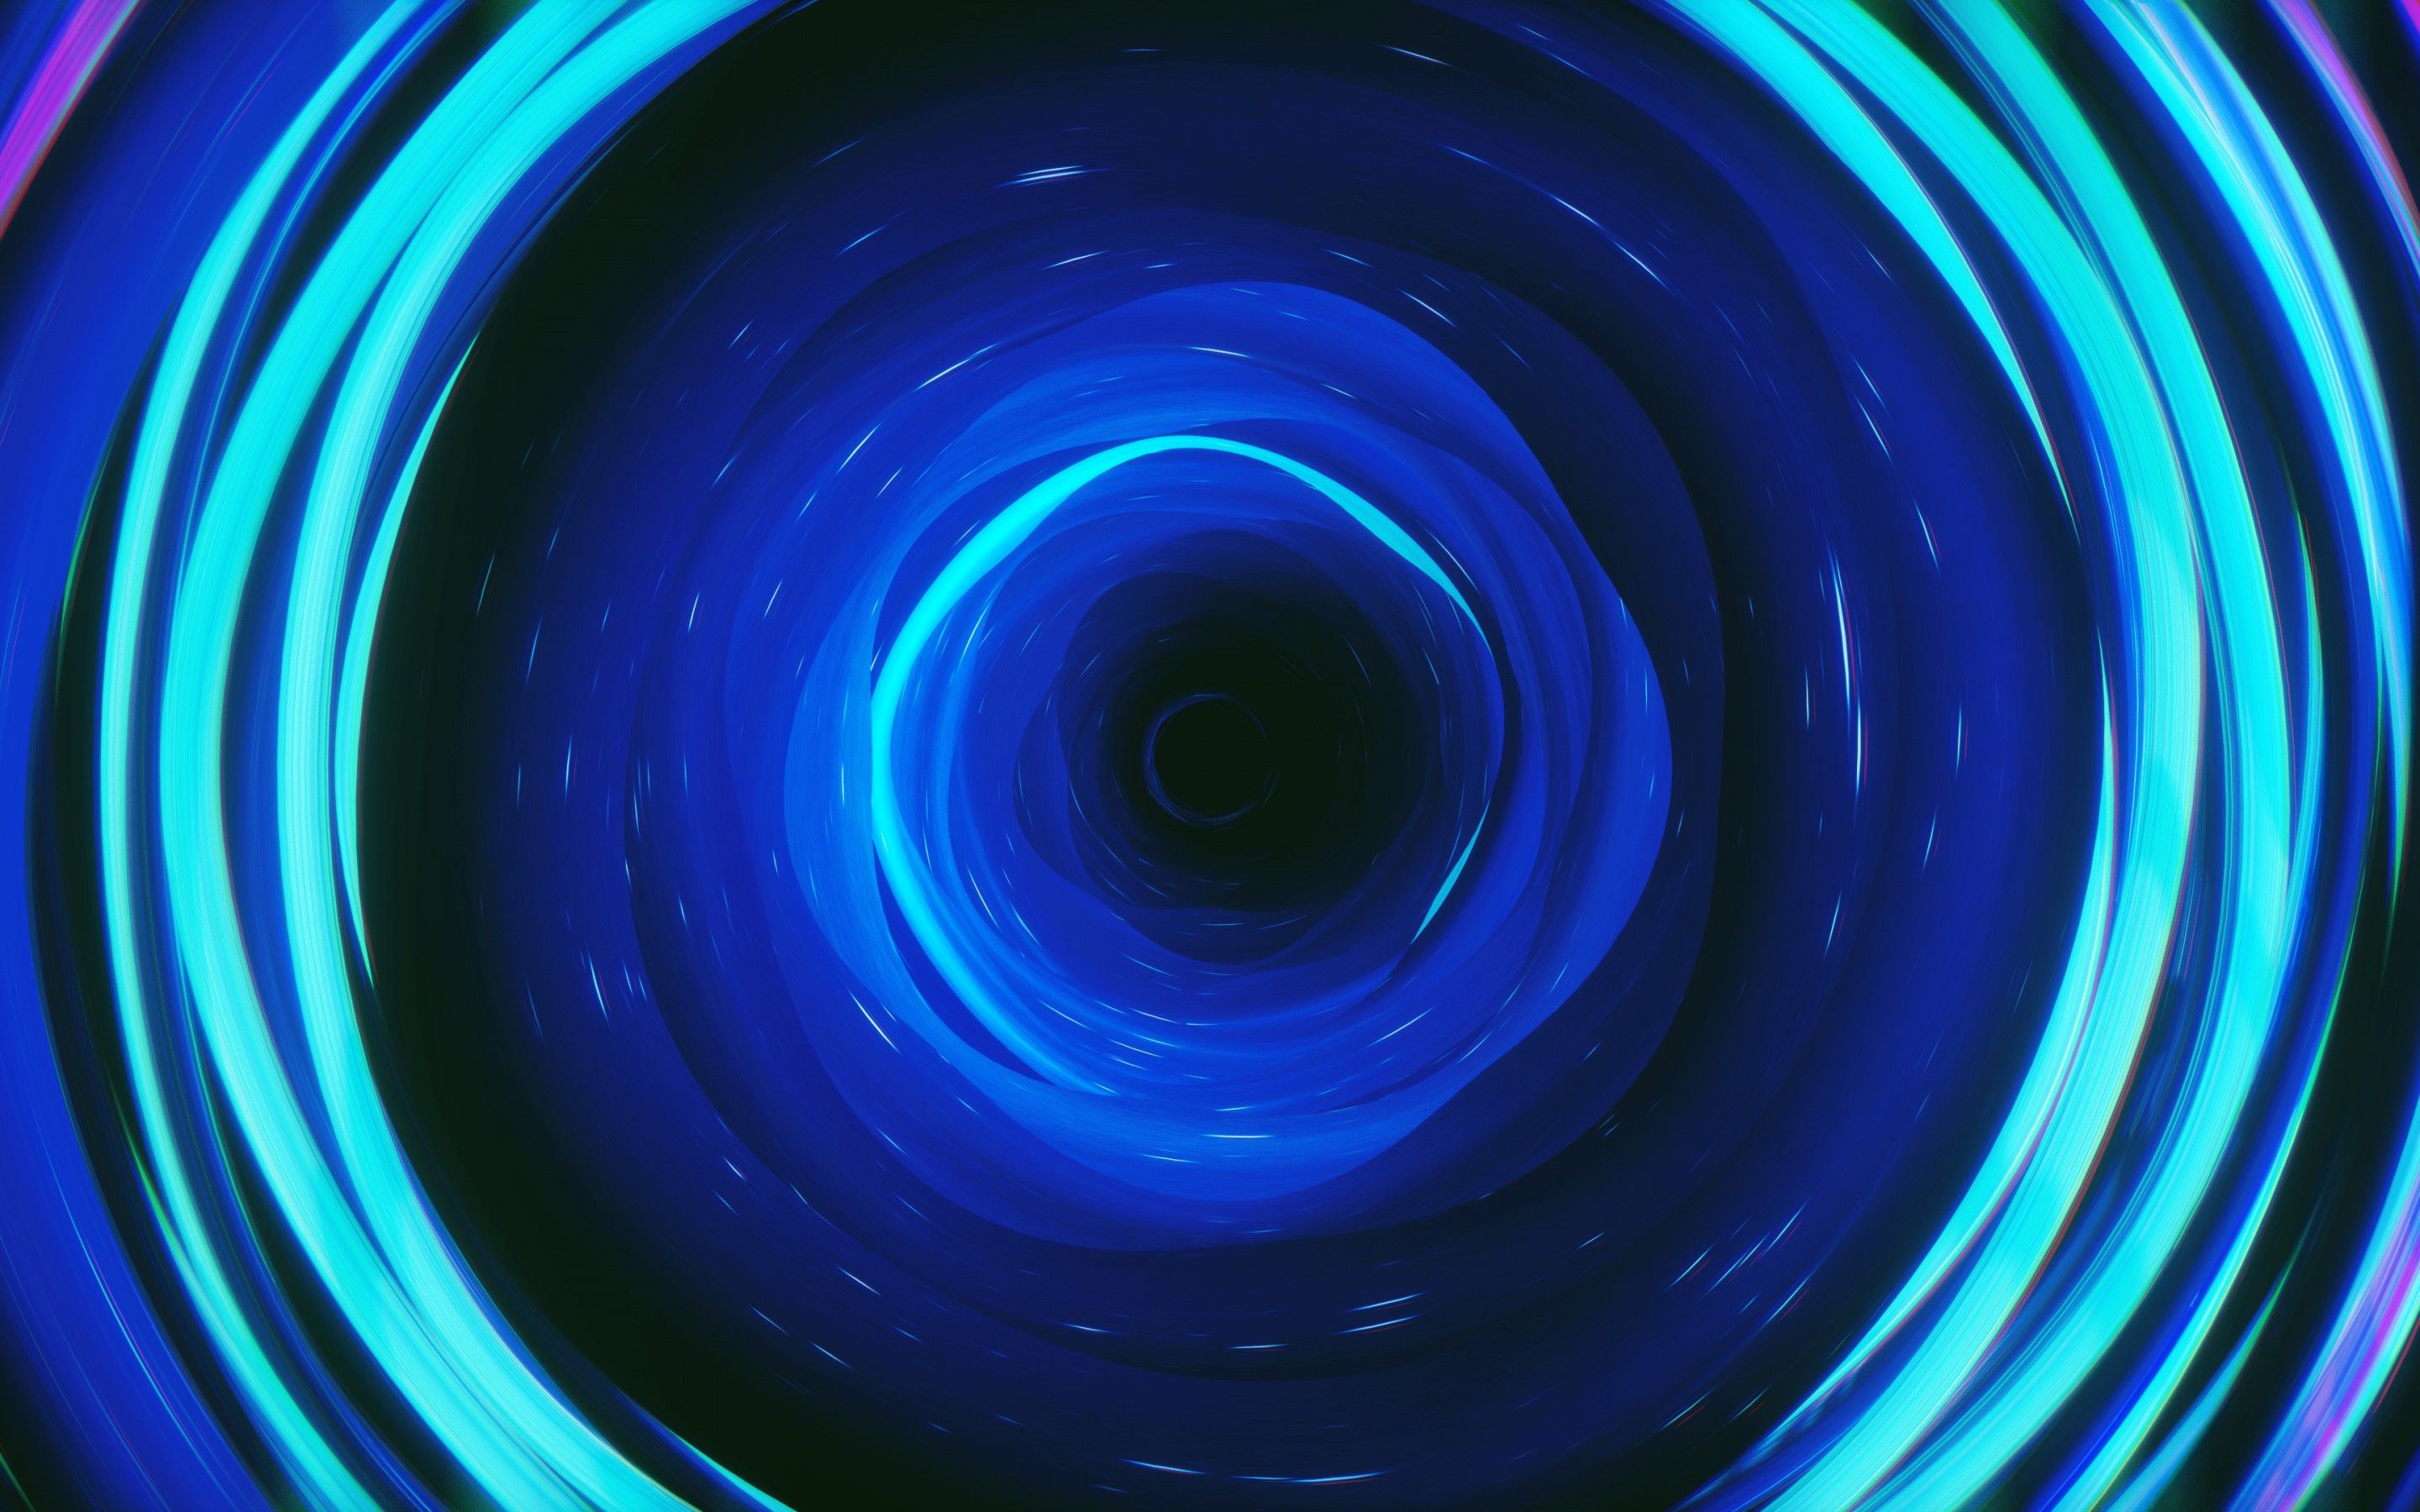 Wallpaper Circles, Neon, Waves, Colorful, Blue, Ocean blue, 4K, Abstract / Editor's Picks,. Wallpaper for iPhone, Android, Mobile and Desktop